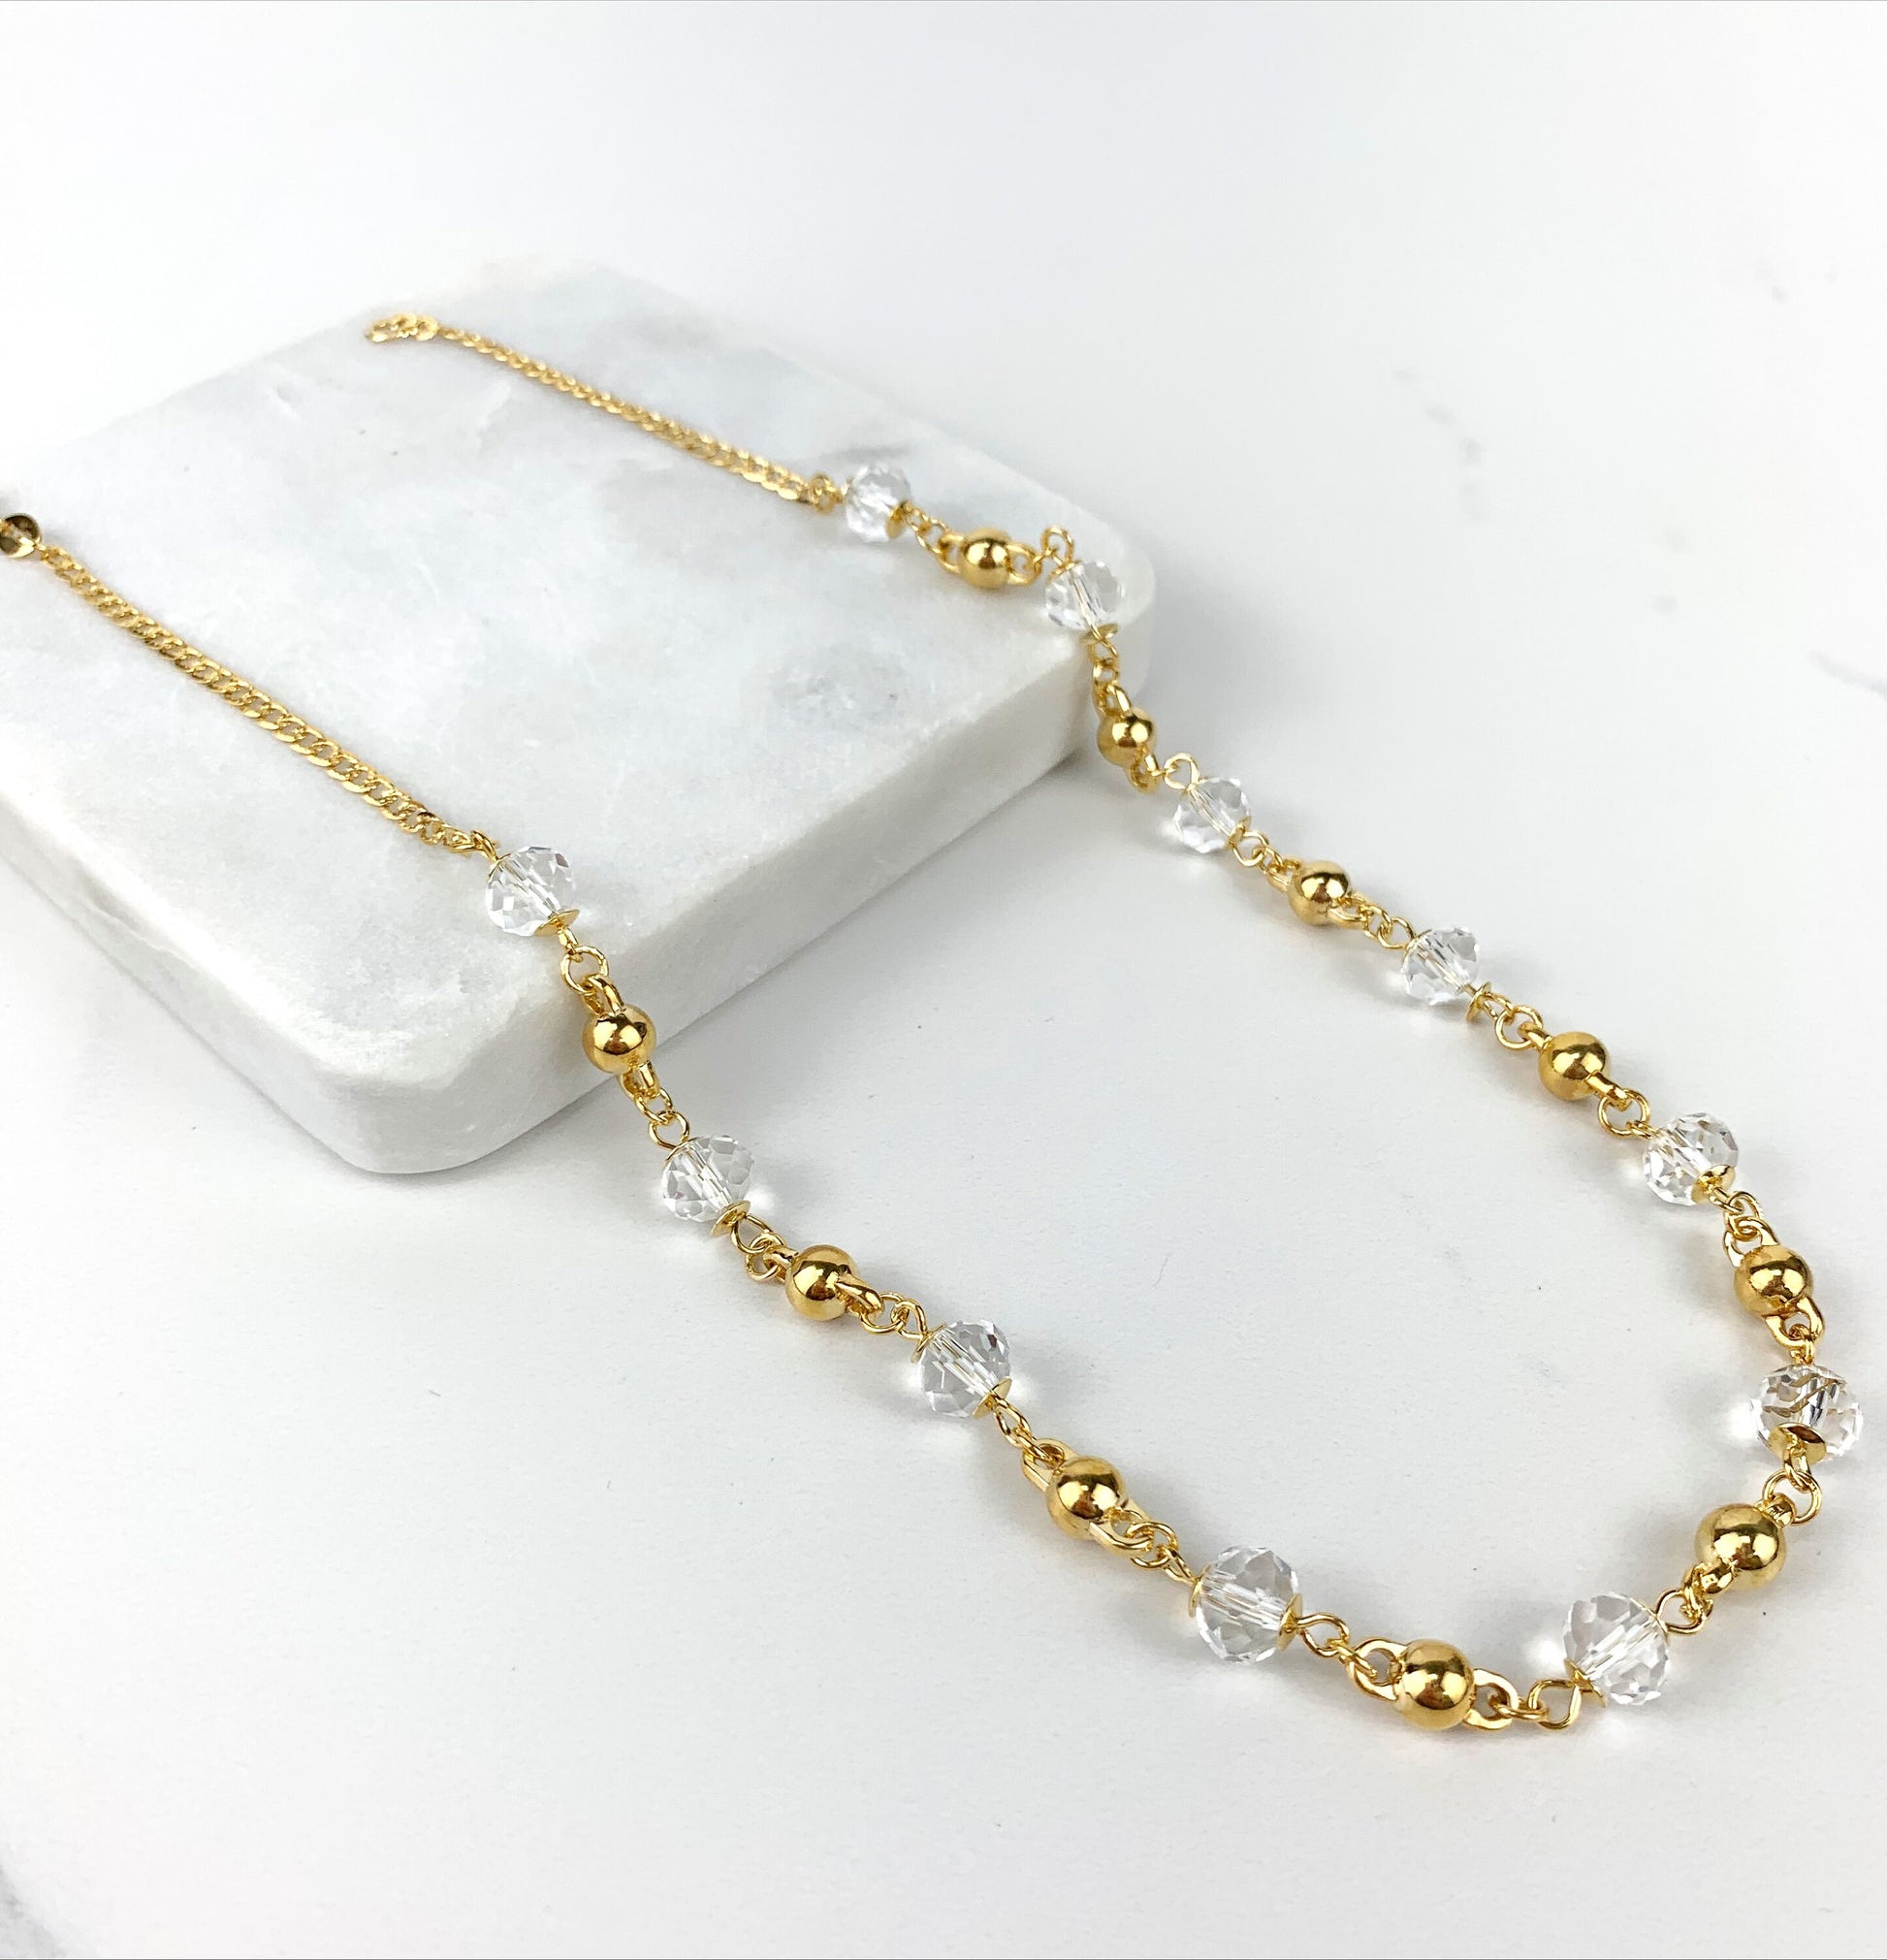 18k Gold Filled Curb Link Chain with Clear Beads and Gold Balls Linked Necklace For Wholesale and Jewelry Supplies